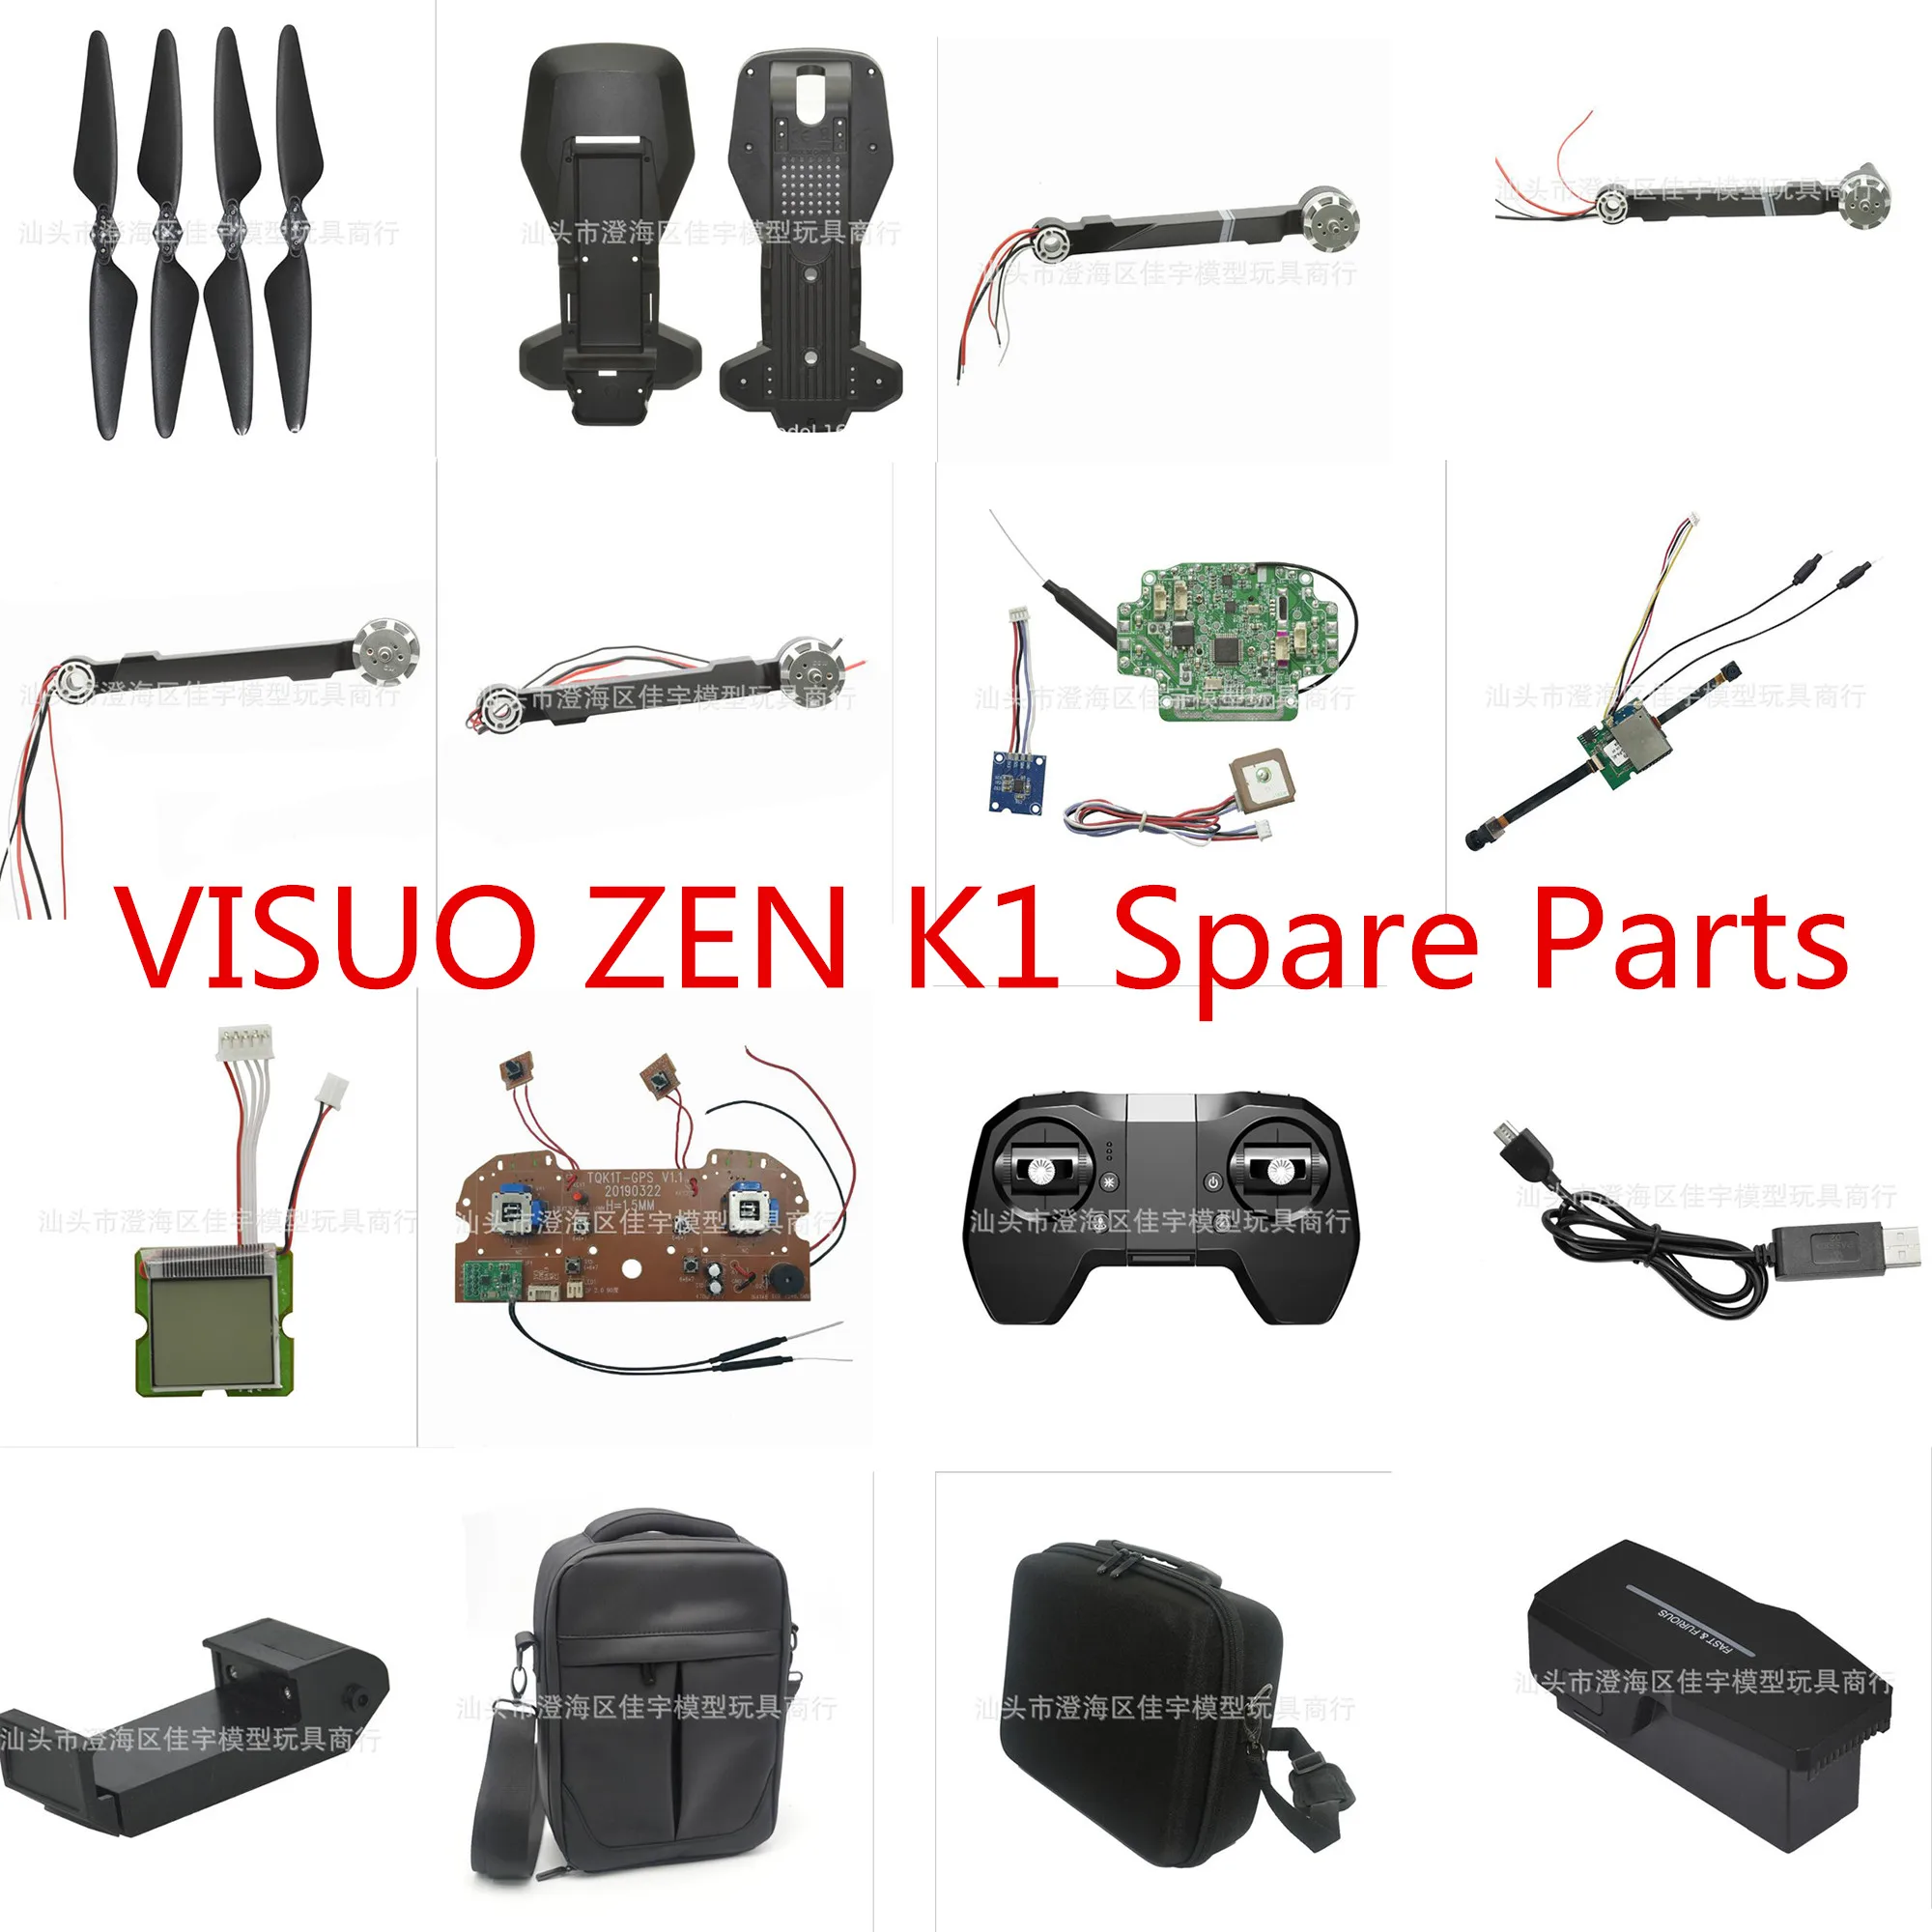 

VISUO ZEN K1 RC Drone Quadcopter Spare Parts body shell blade propeller Arm with motor receiver GPS Geomagnetic camera line etc